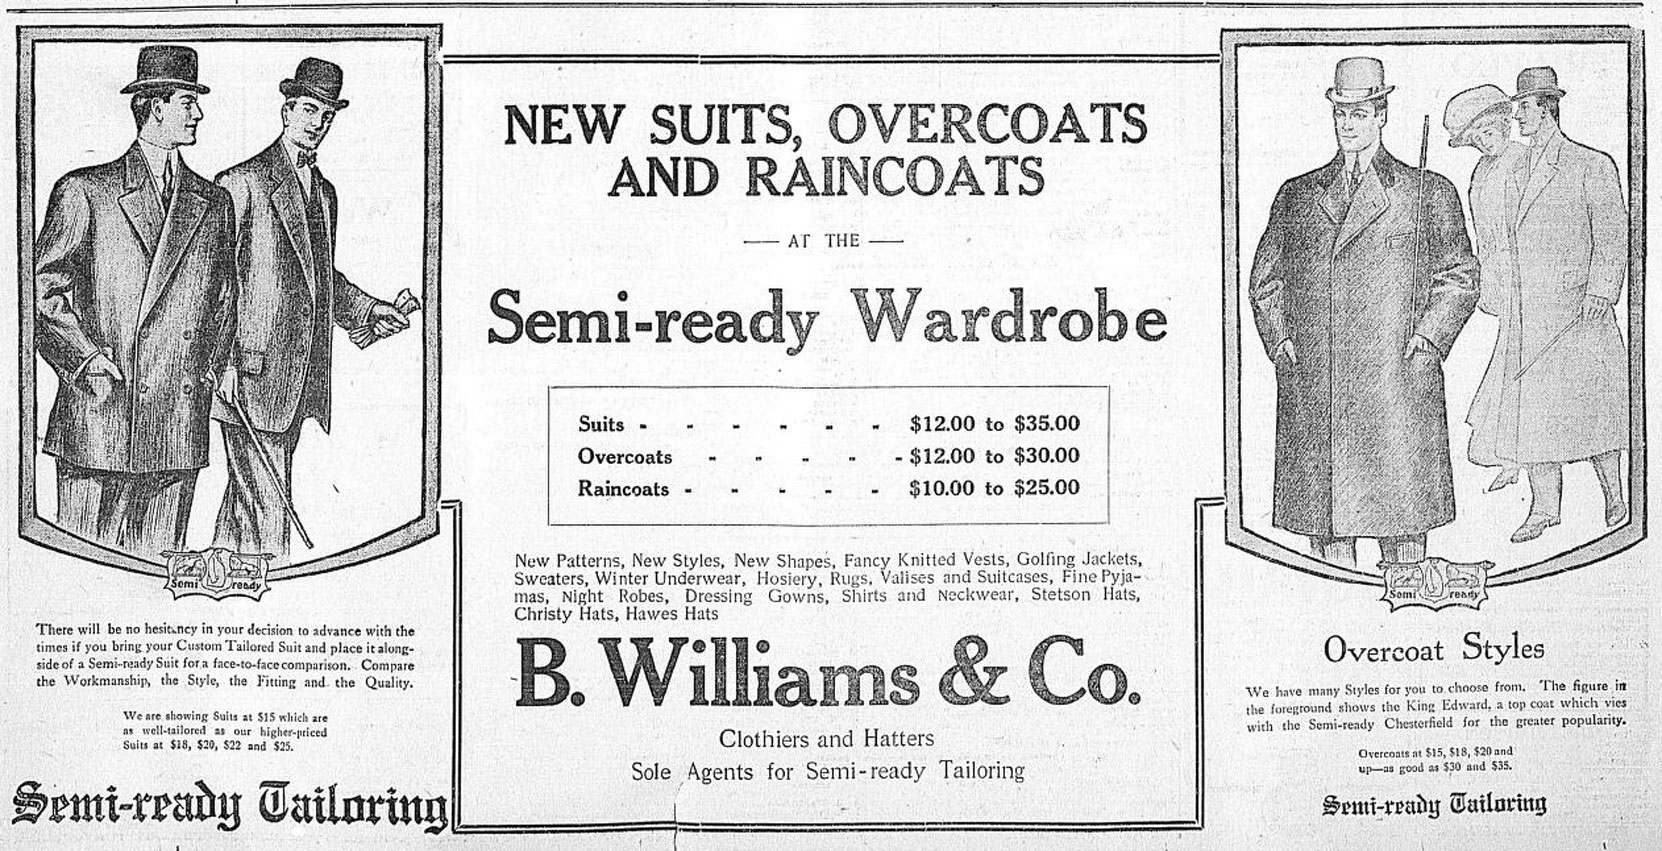 1908 advertisement for B. Williams & Co., Clothiers & Hatters, 614 Yates Street (Victoria Online Sightseeing Tours collection)